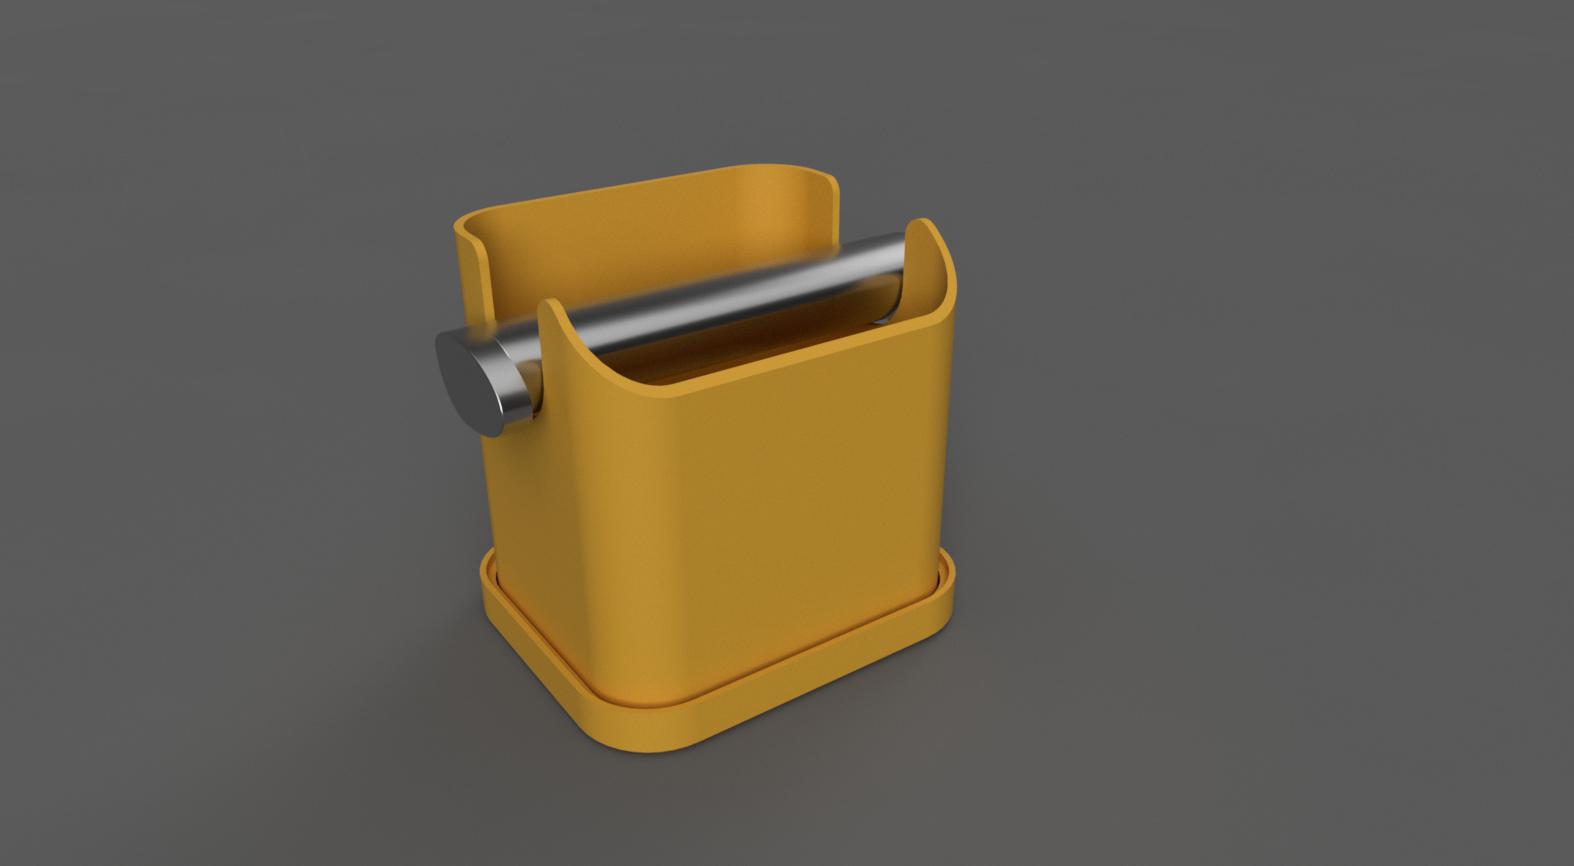 Knockbox mk2 - with air vents